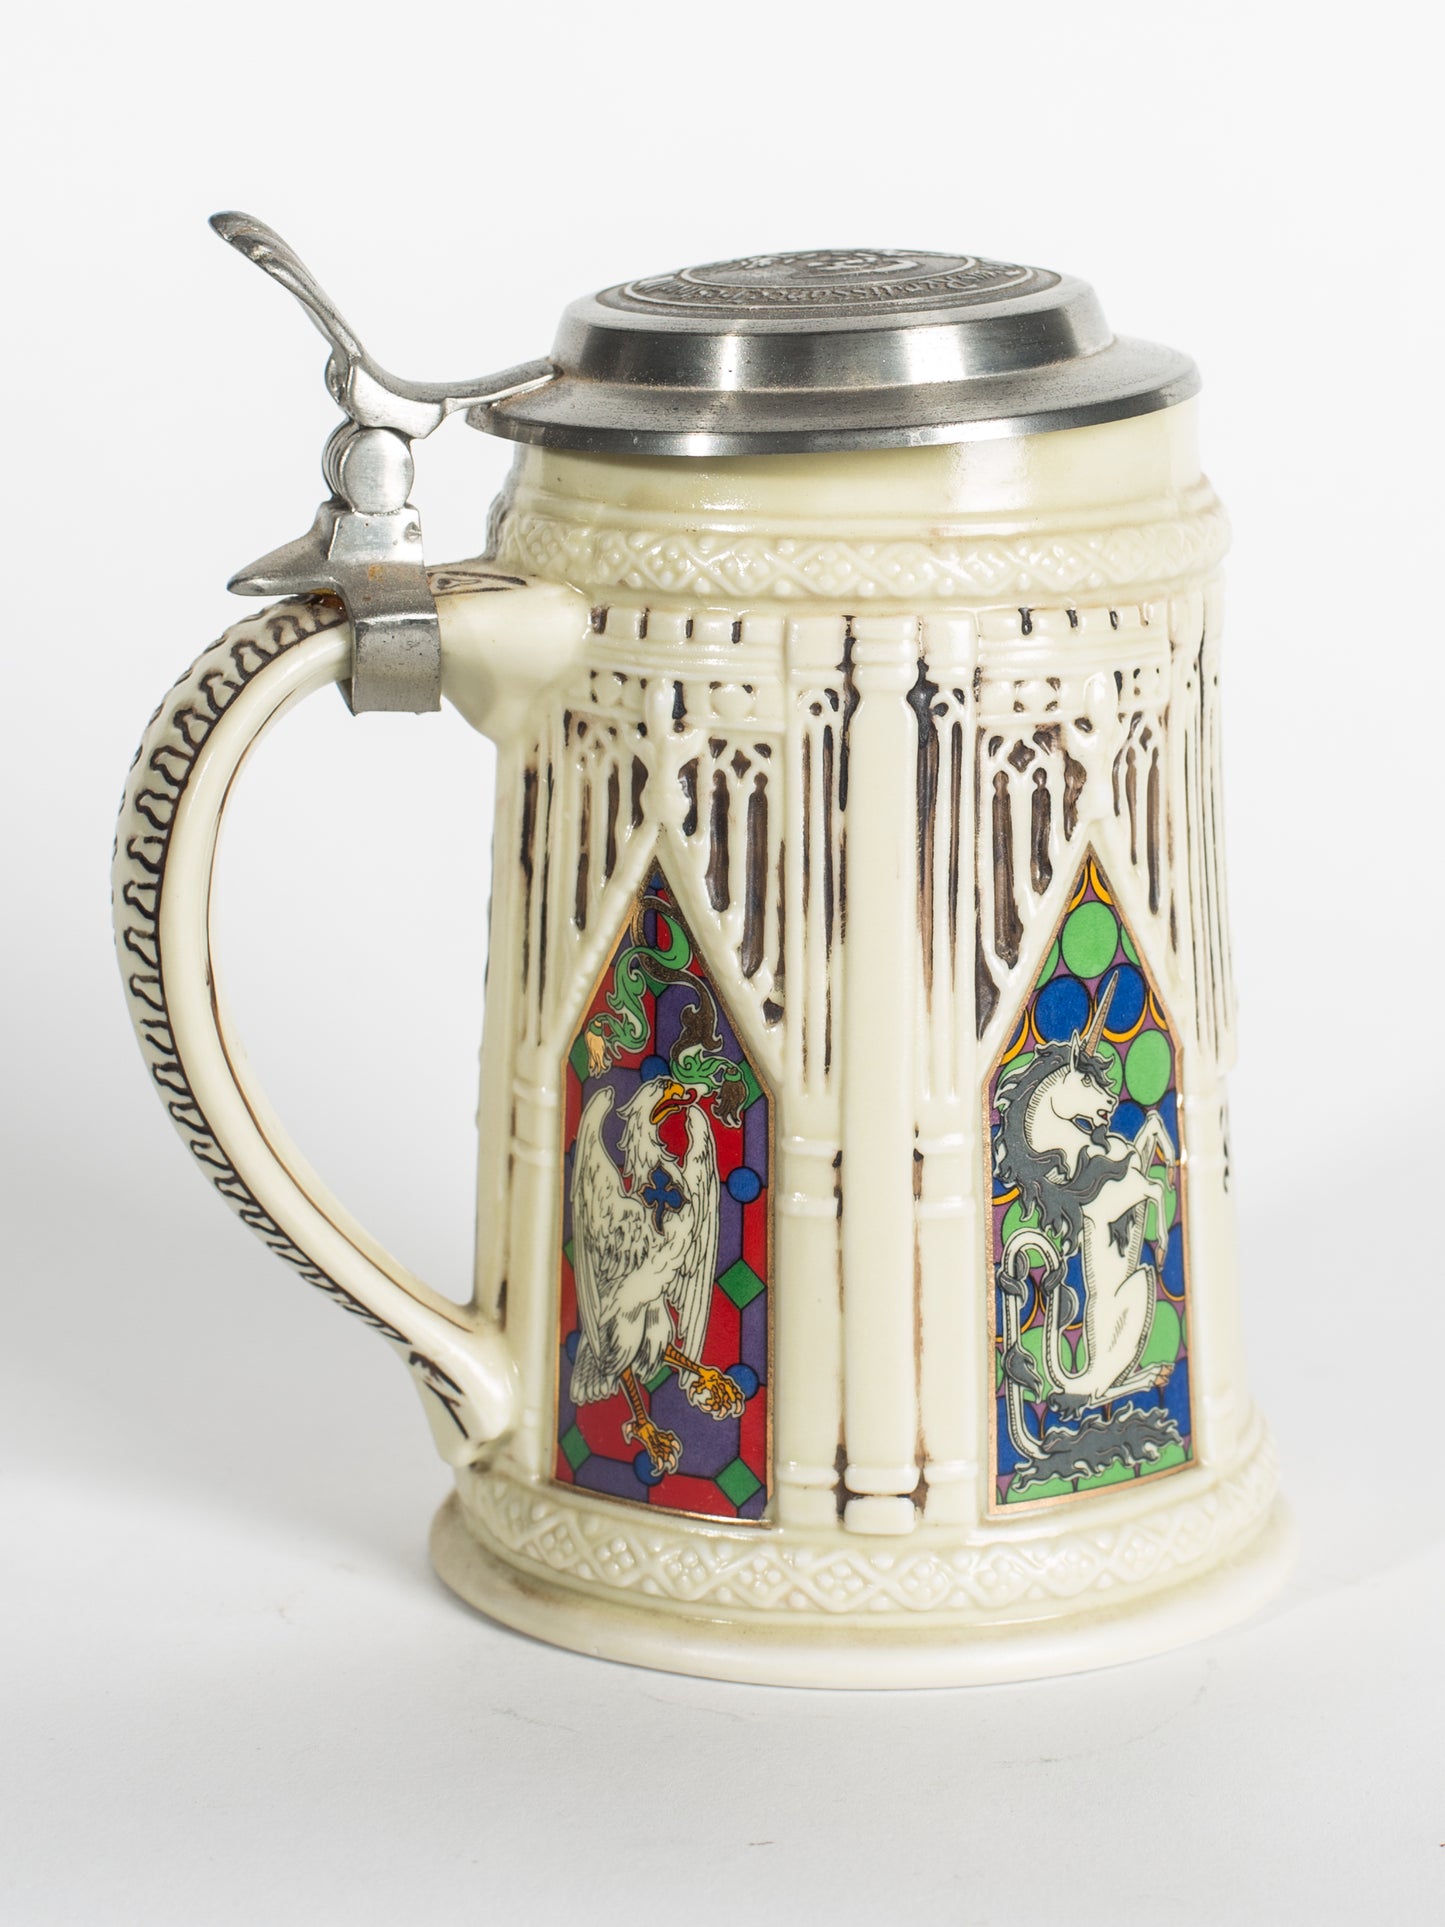 1993 Tankard: Gothic Catherdral